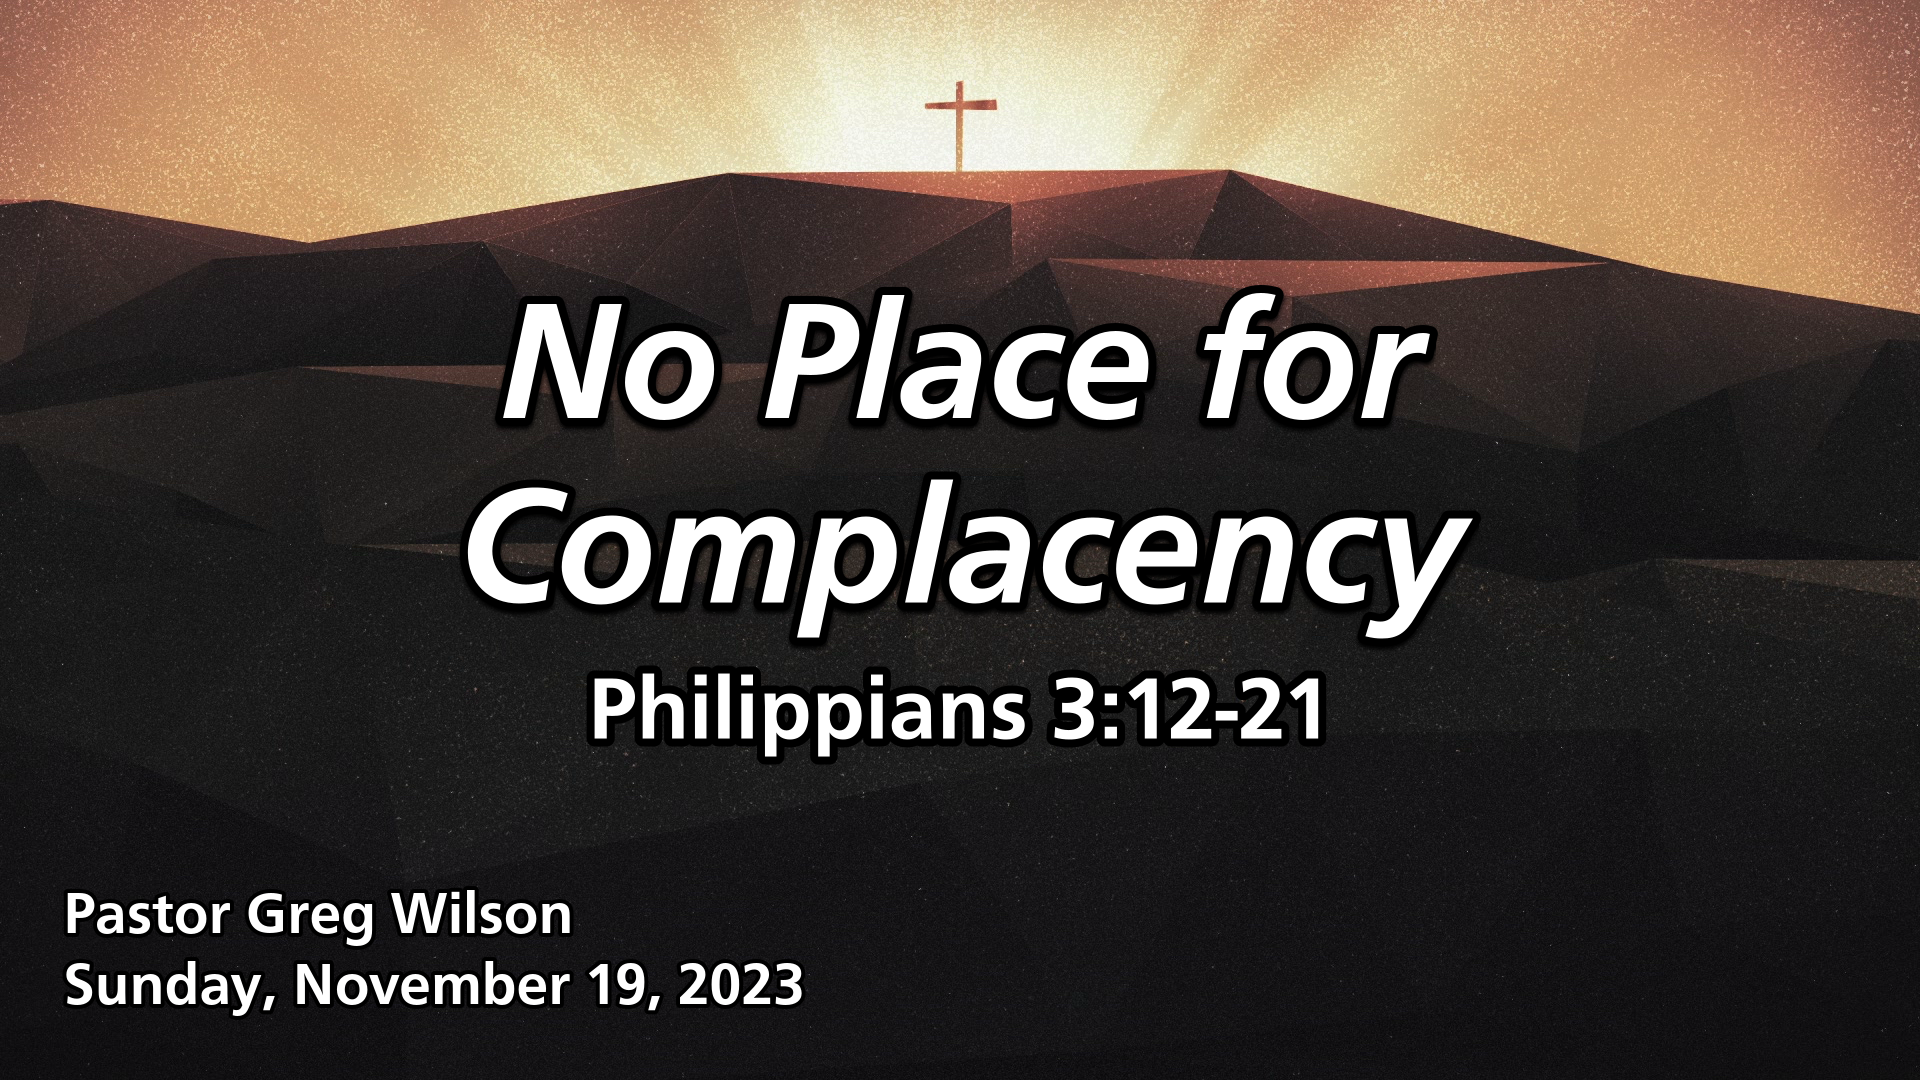 "No Place for Complacency"